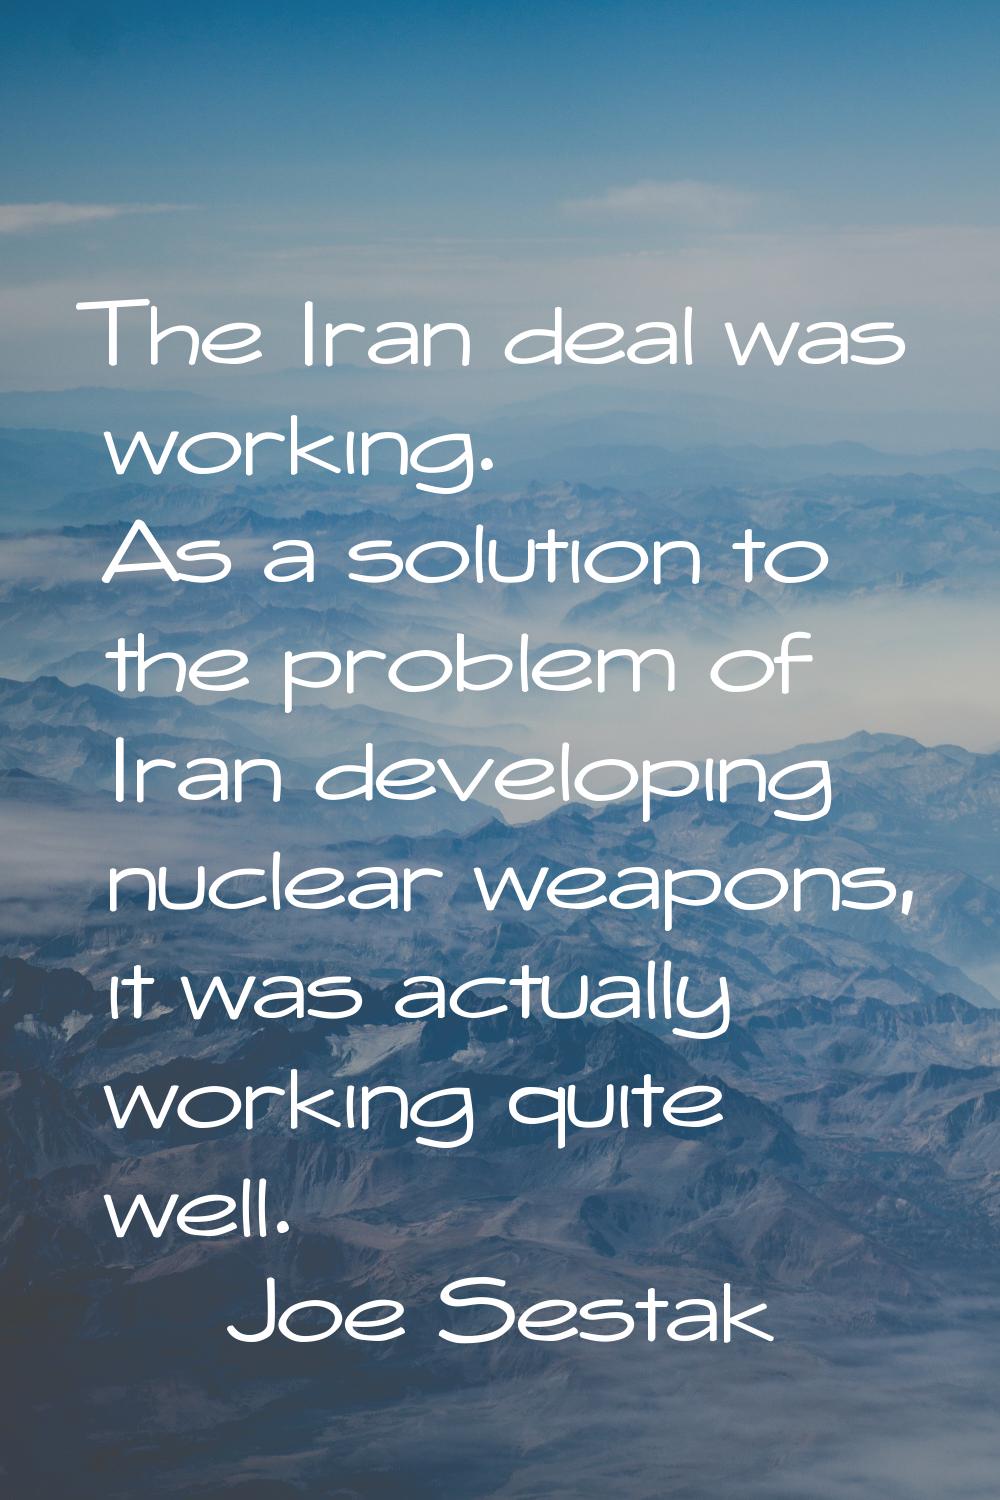 The Iran deal was working. As a solution to the problem of Iran developing nuclear weapons, it was 